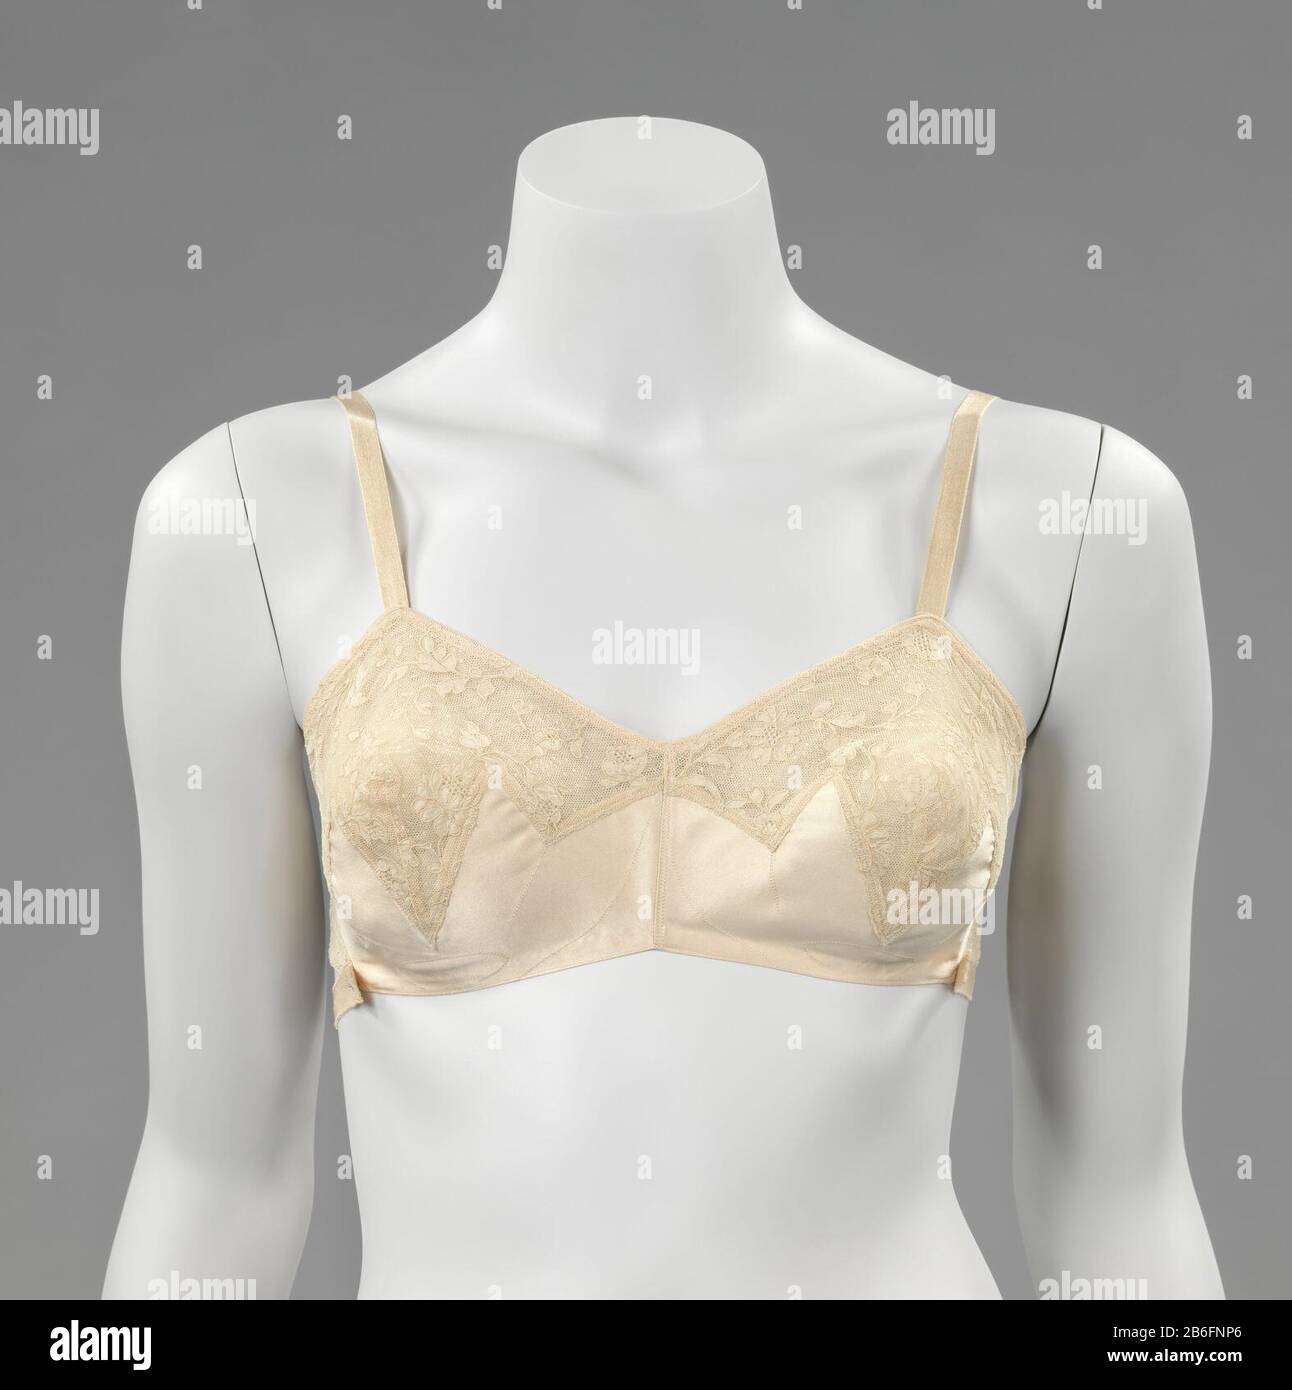 Page 3 - Lace Bra High Resolution Stock Photography and Images - Alamy